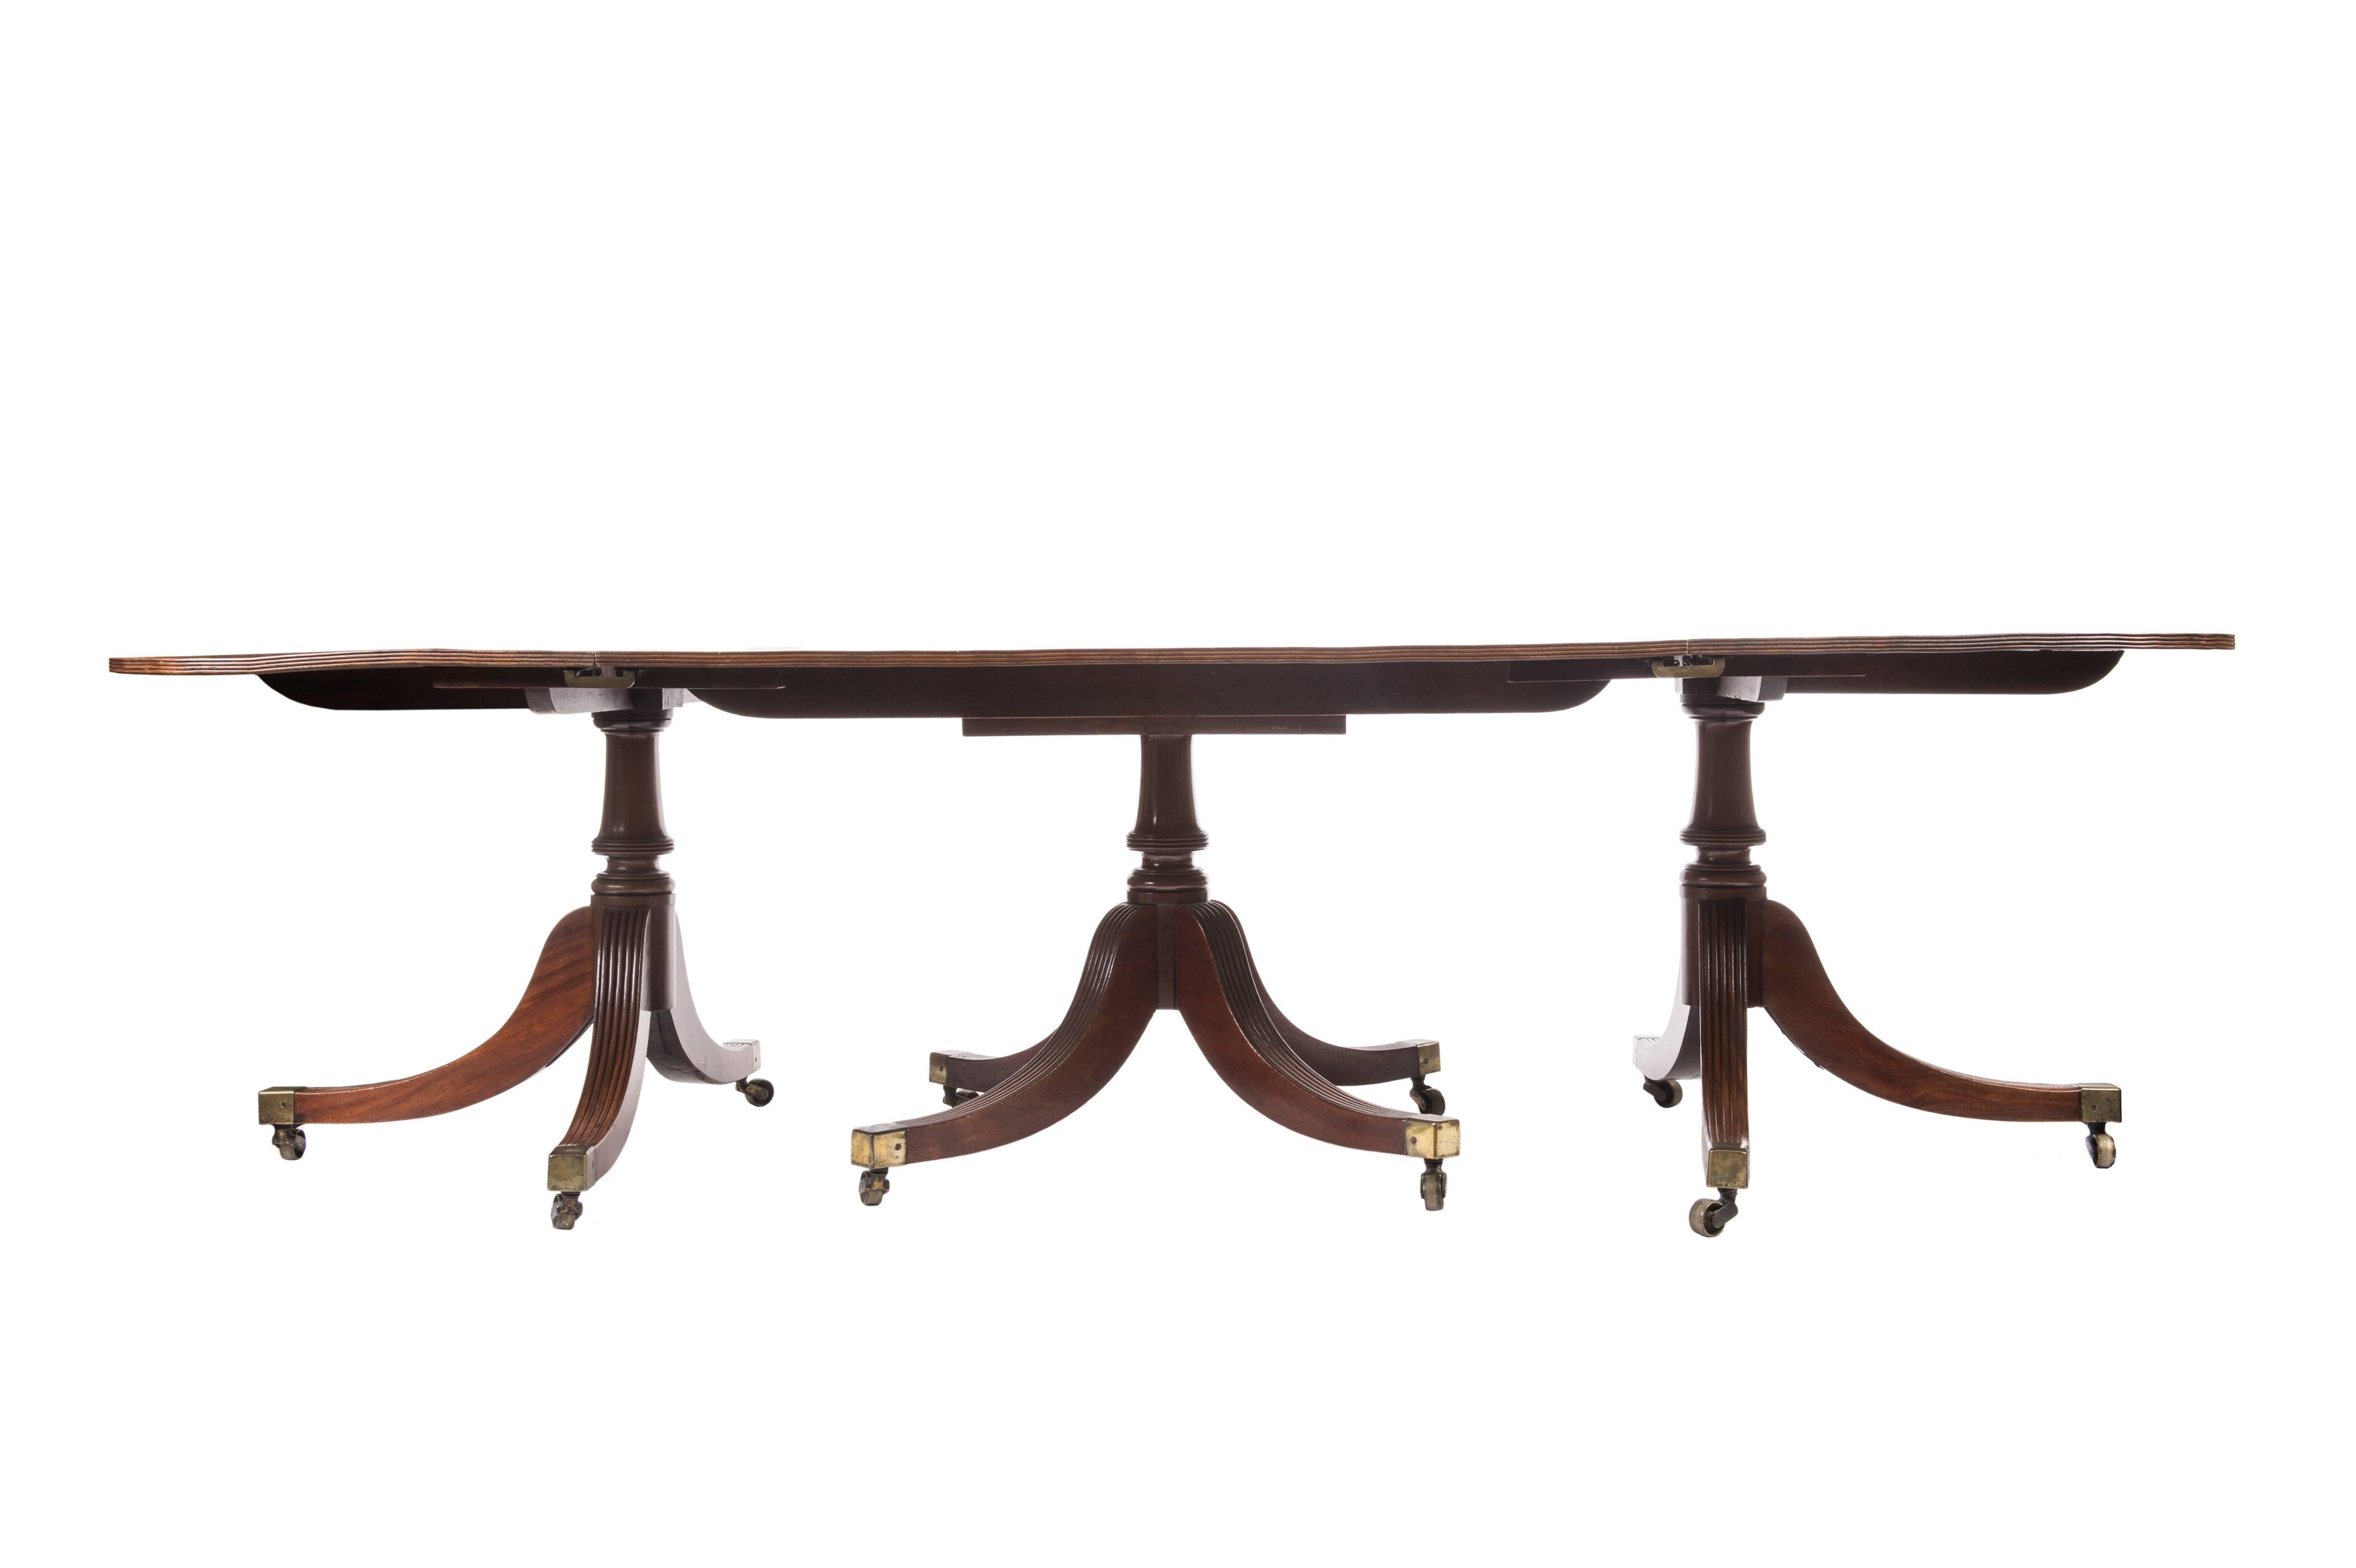 A fine 19th century Regency period well figured mahogany three pedestal dining table, having reeded edge top fitted with two matching figured leaves, supported on ring turned stem, slay legs ending with brass caps and castors.